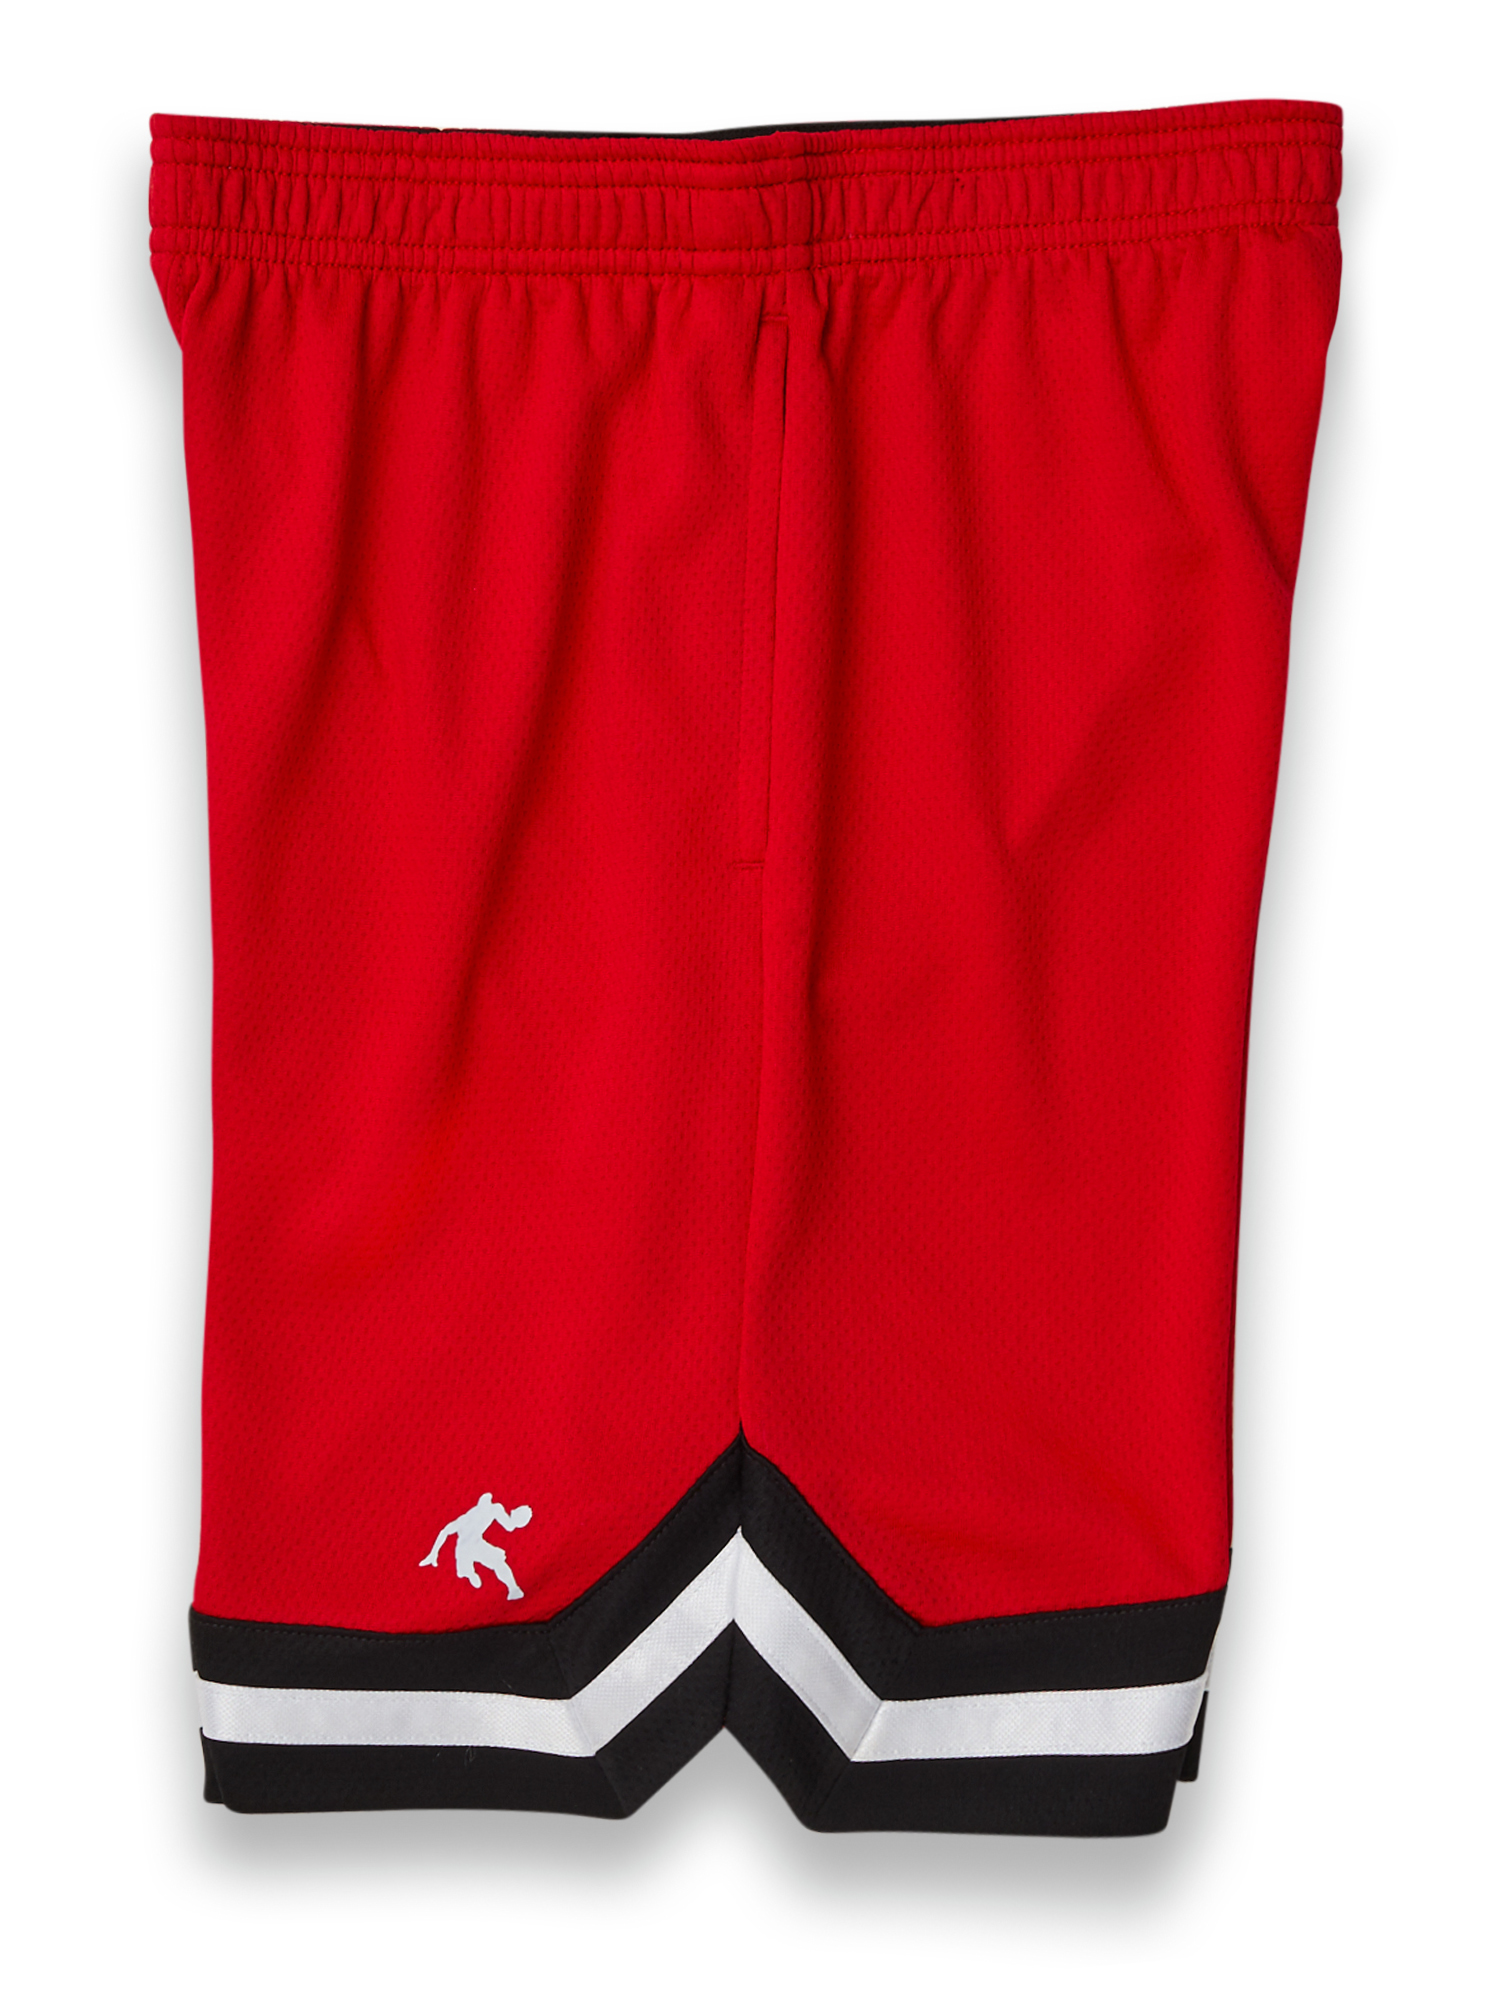 AND1 Boys Jersey Tank & Basketball Shorts 2-Piece Outfit Set, Sizes 4-18 - image 5 of 5